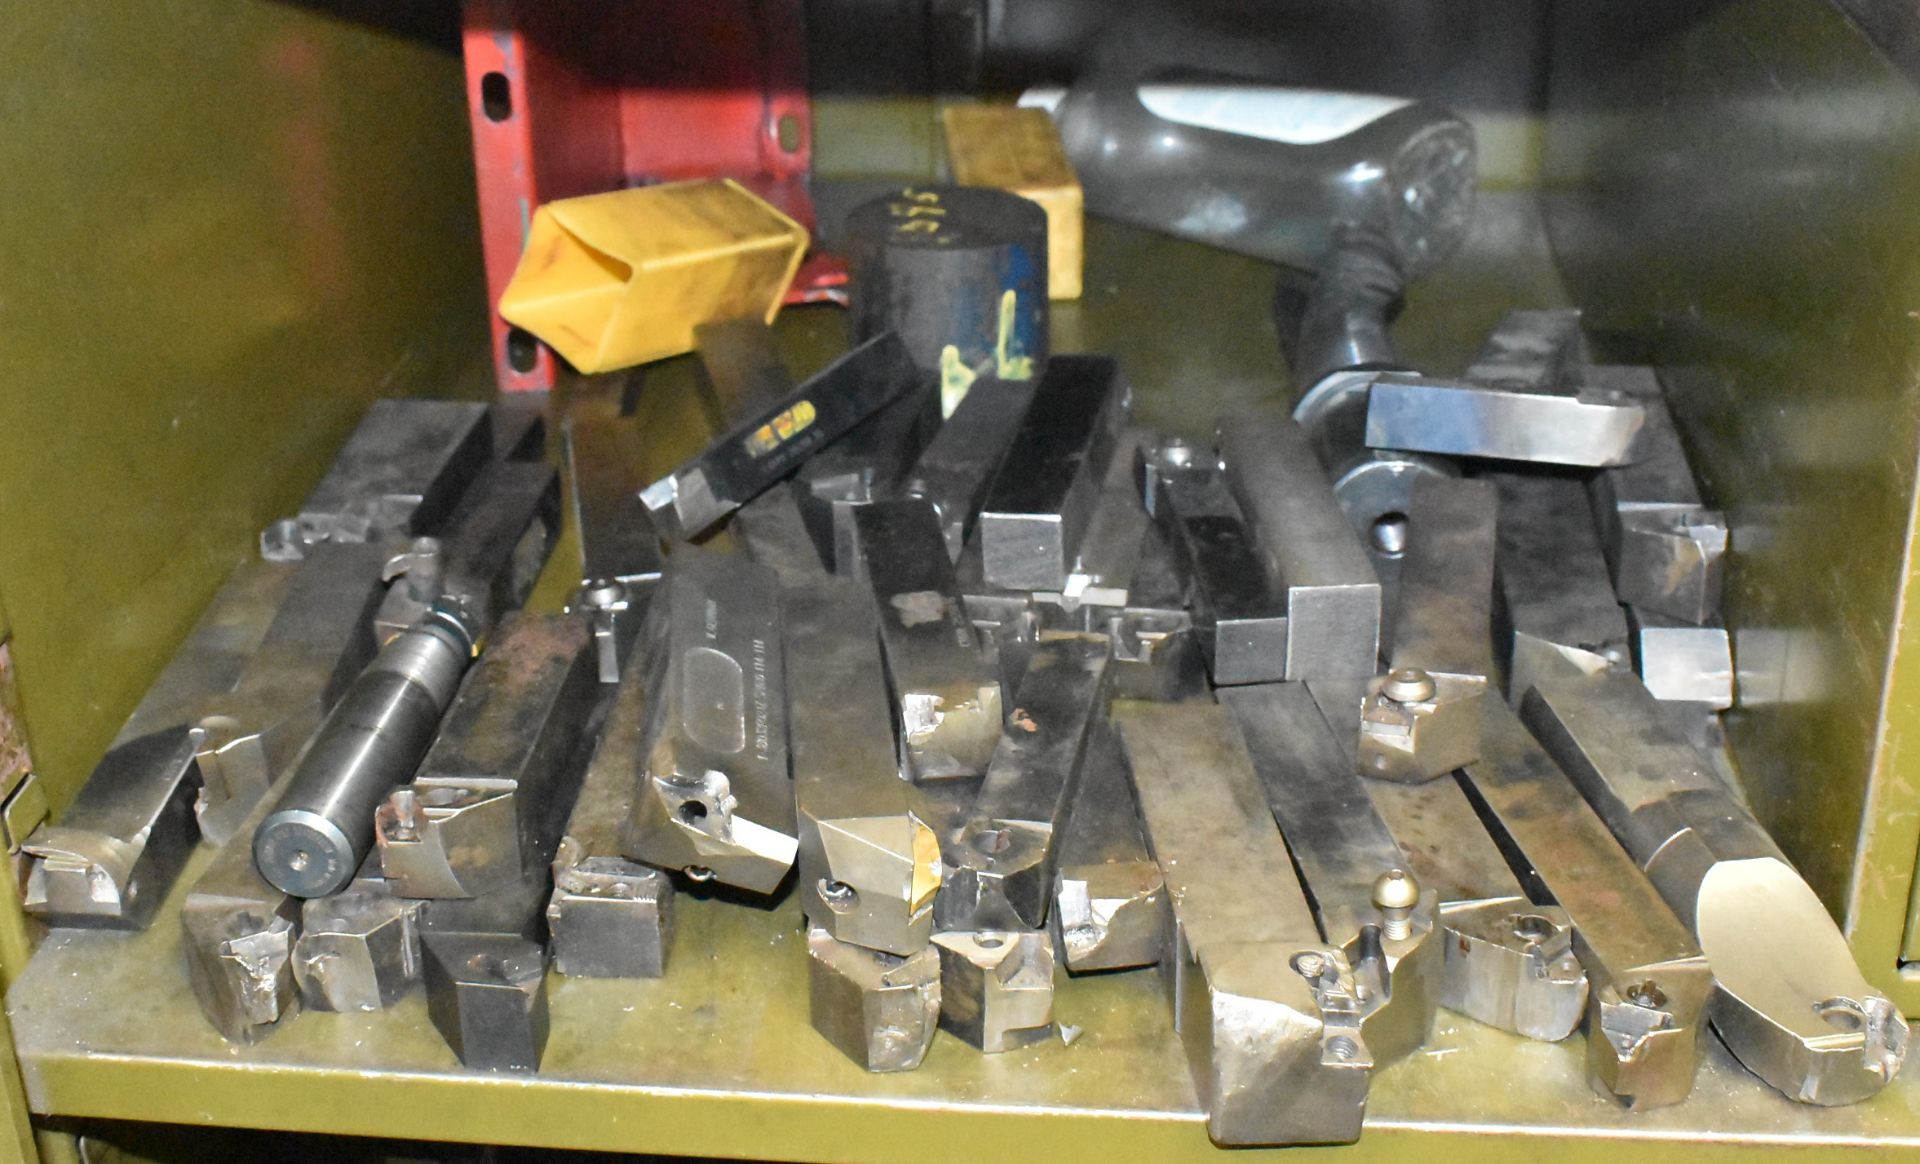 LOT/ CONTENTS OF CABINET - HSS AND CARBIDE INSERT LATHE CUTTERS AND BORING BARS, CARBIDE INSERT FACE - Image 2 of 3